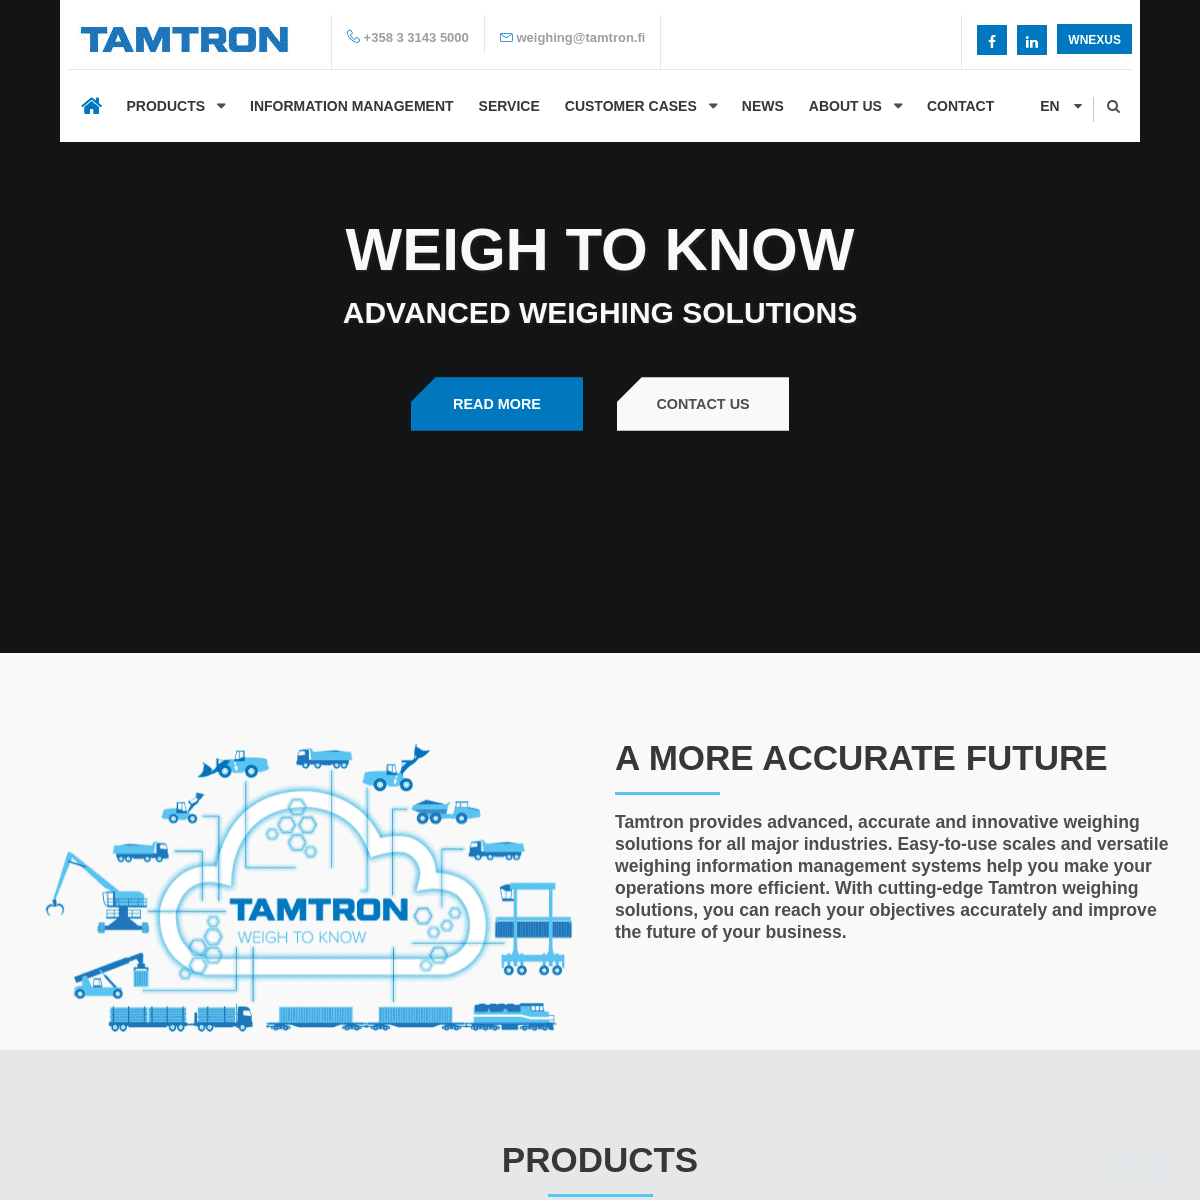 A complete backup of https://tamtrongroup.com